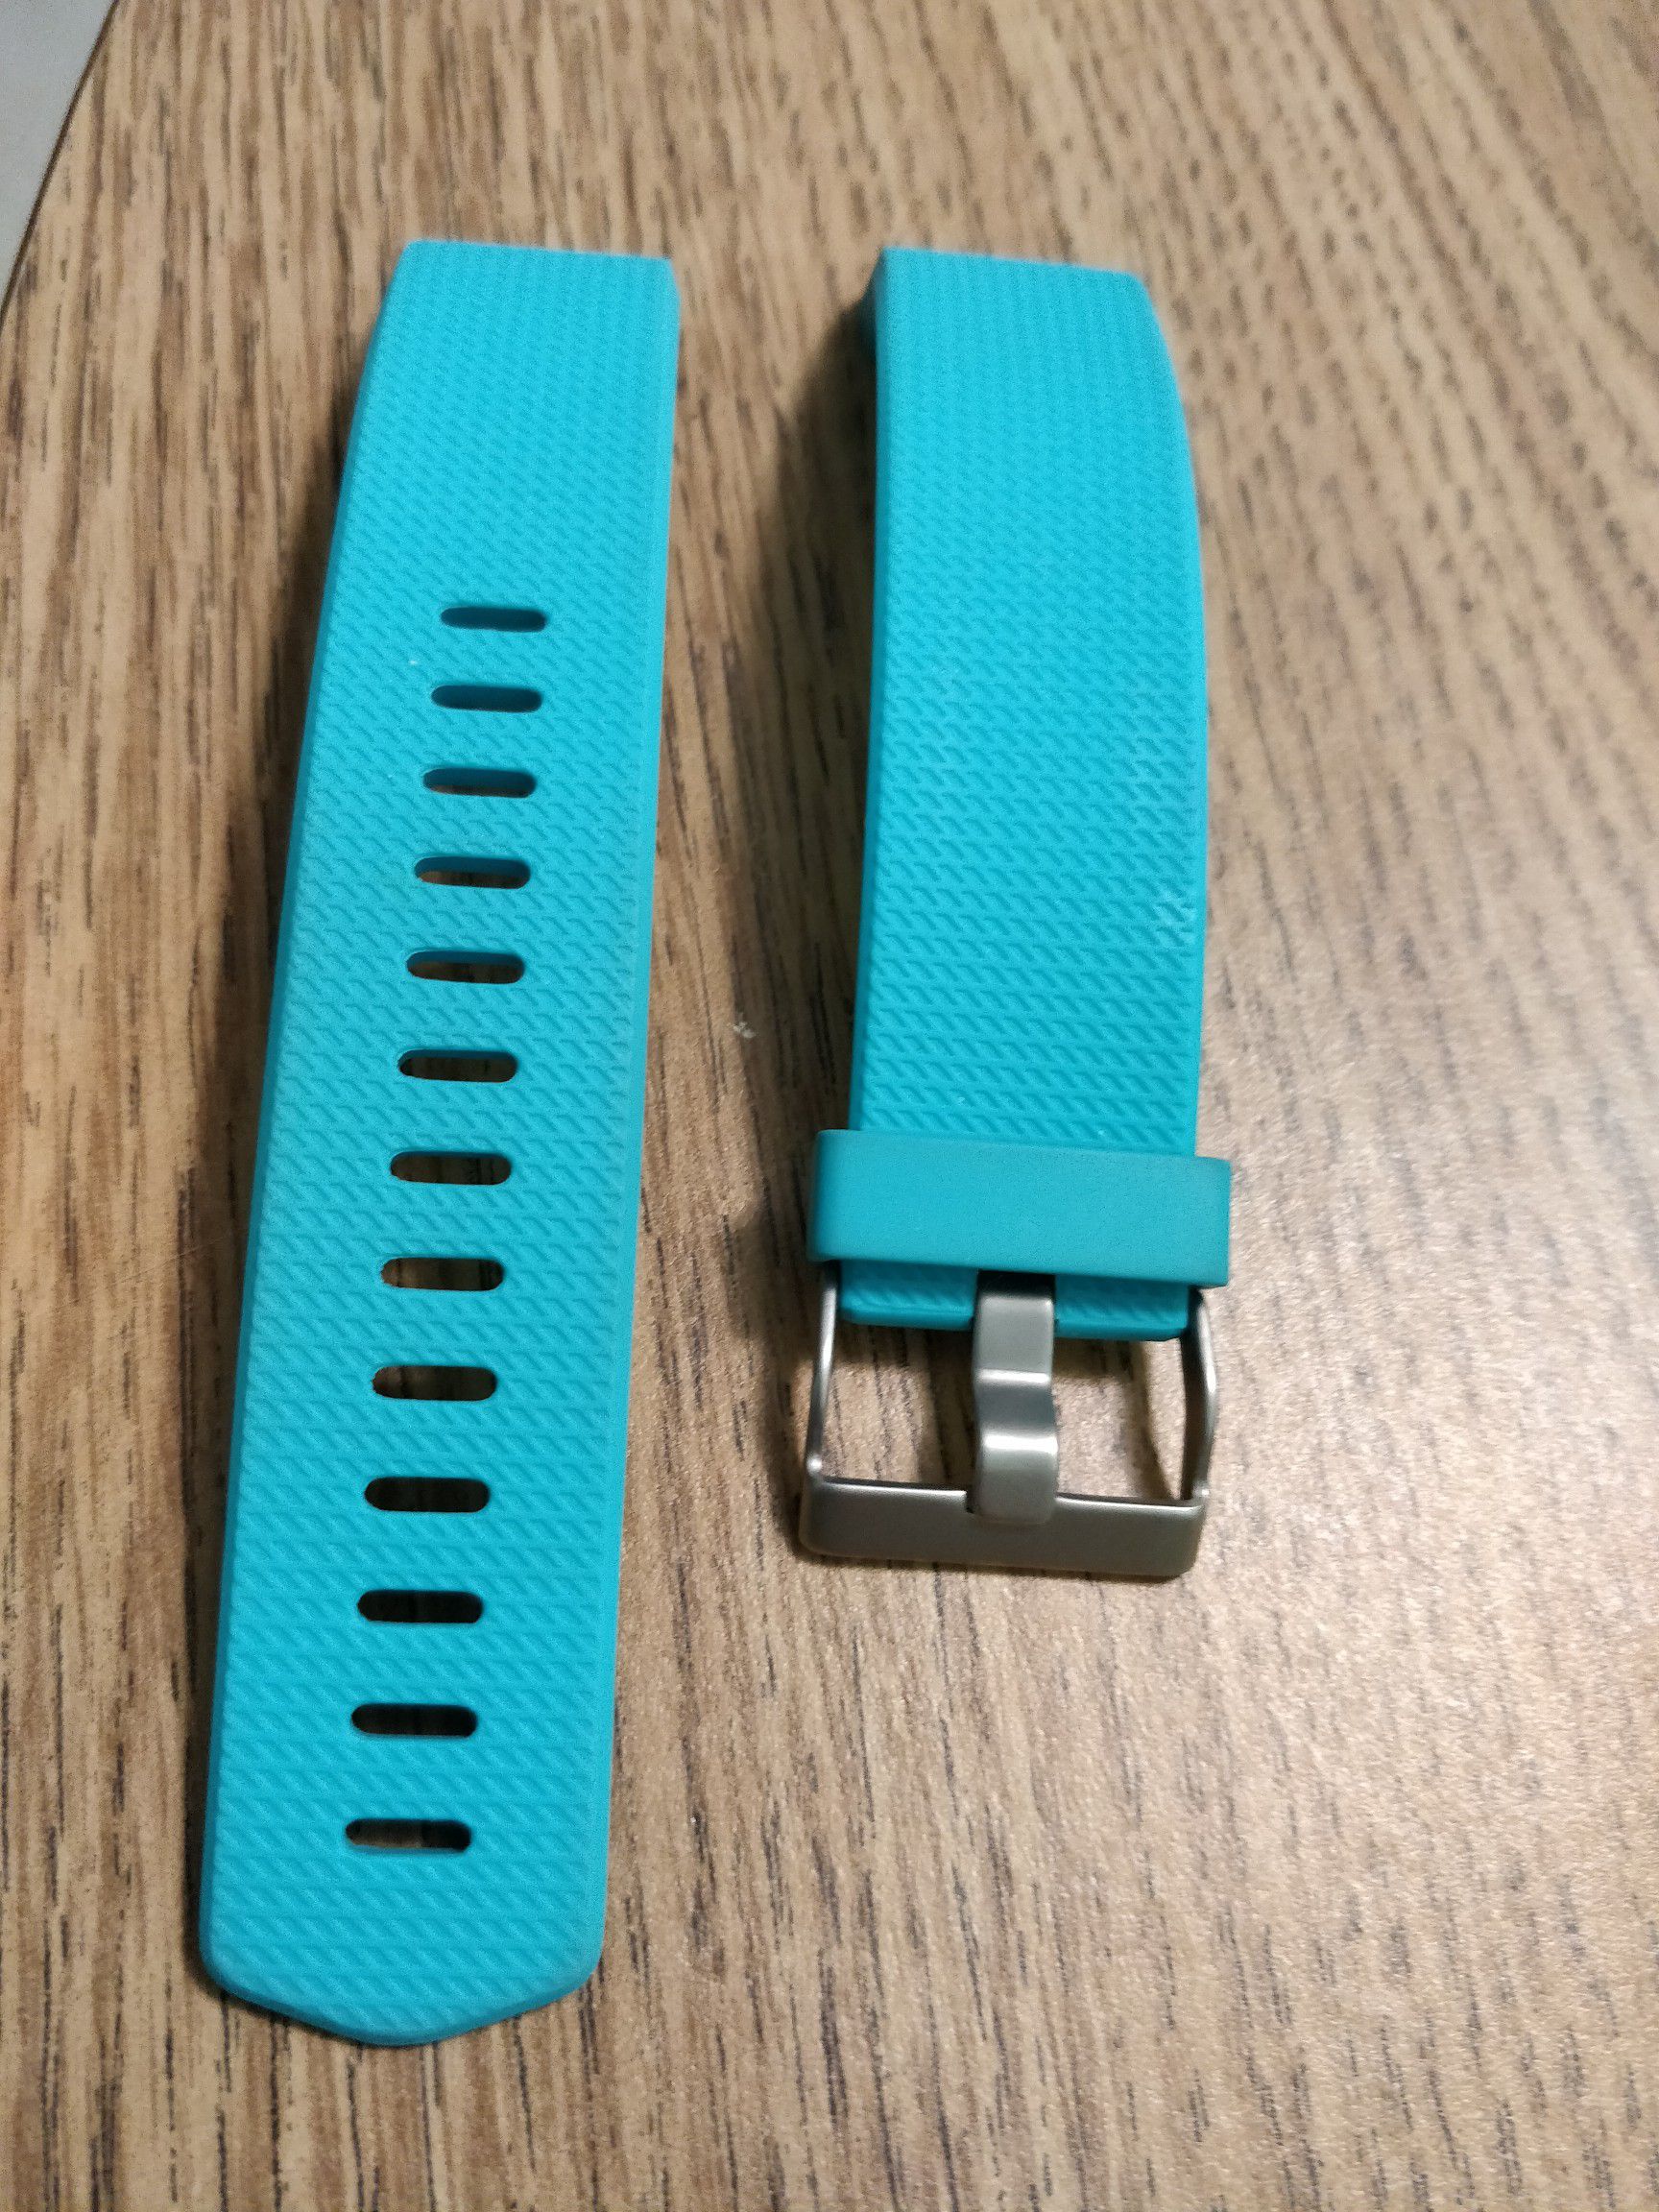 Teal Fitbit charge 2 band